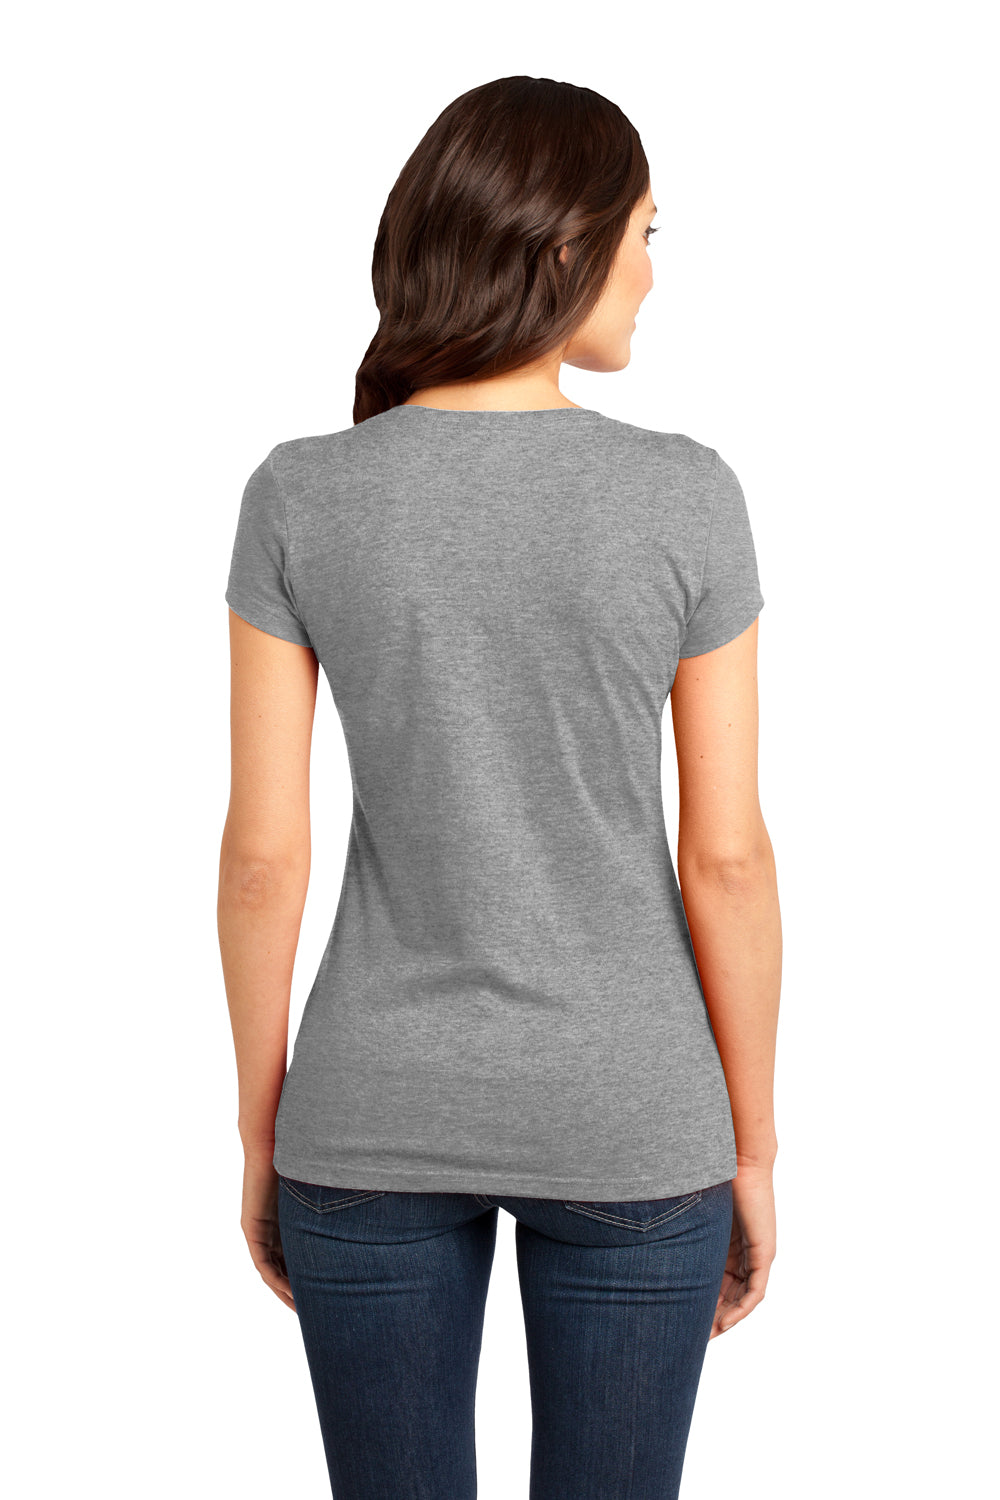 District DT6001 Womens Very Important Short Sleeve Crewneck T-Shirt Grey Frost Back